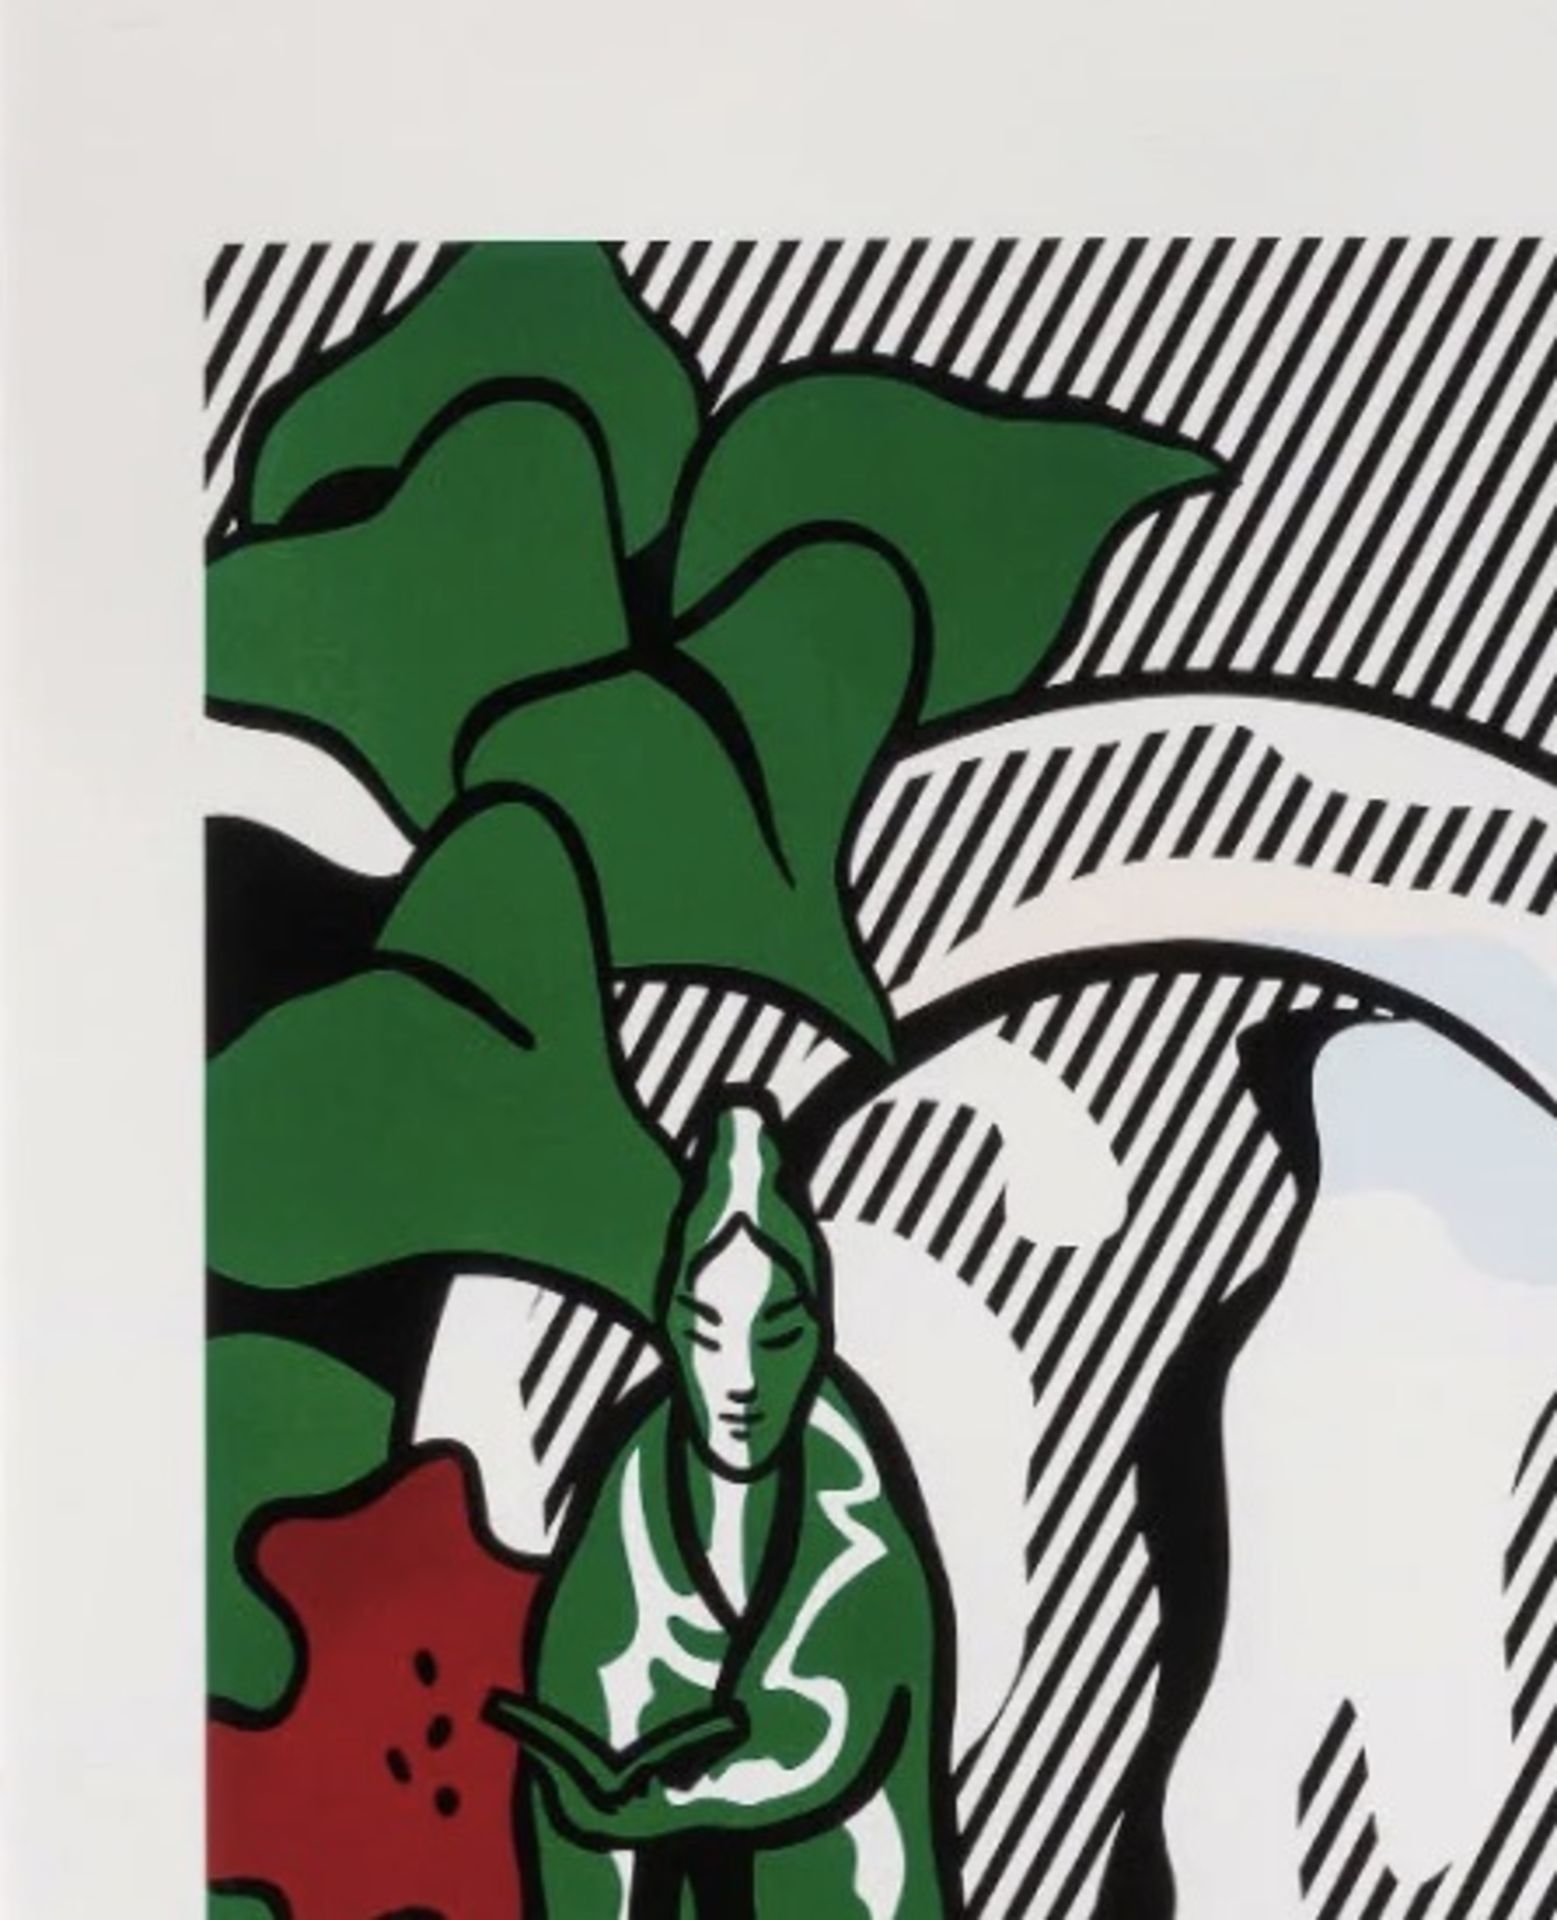 Roy Lichtenstein "Untitled" Plate Signed Offset Lithograph - Image 3 of 5